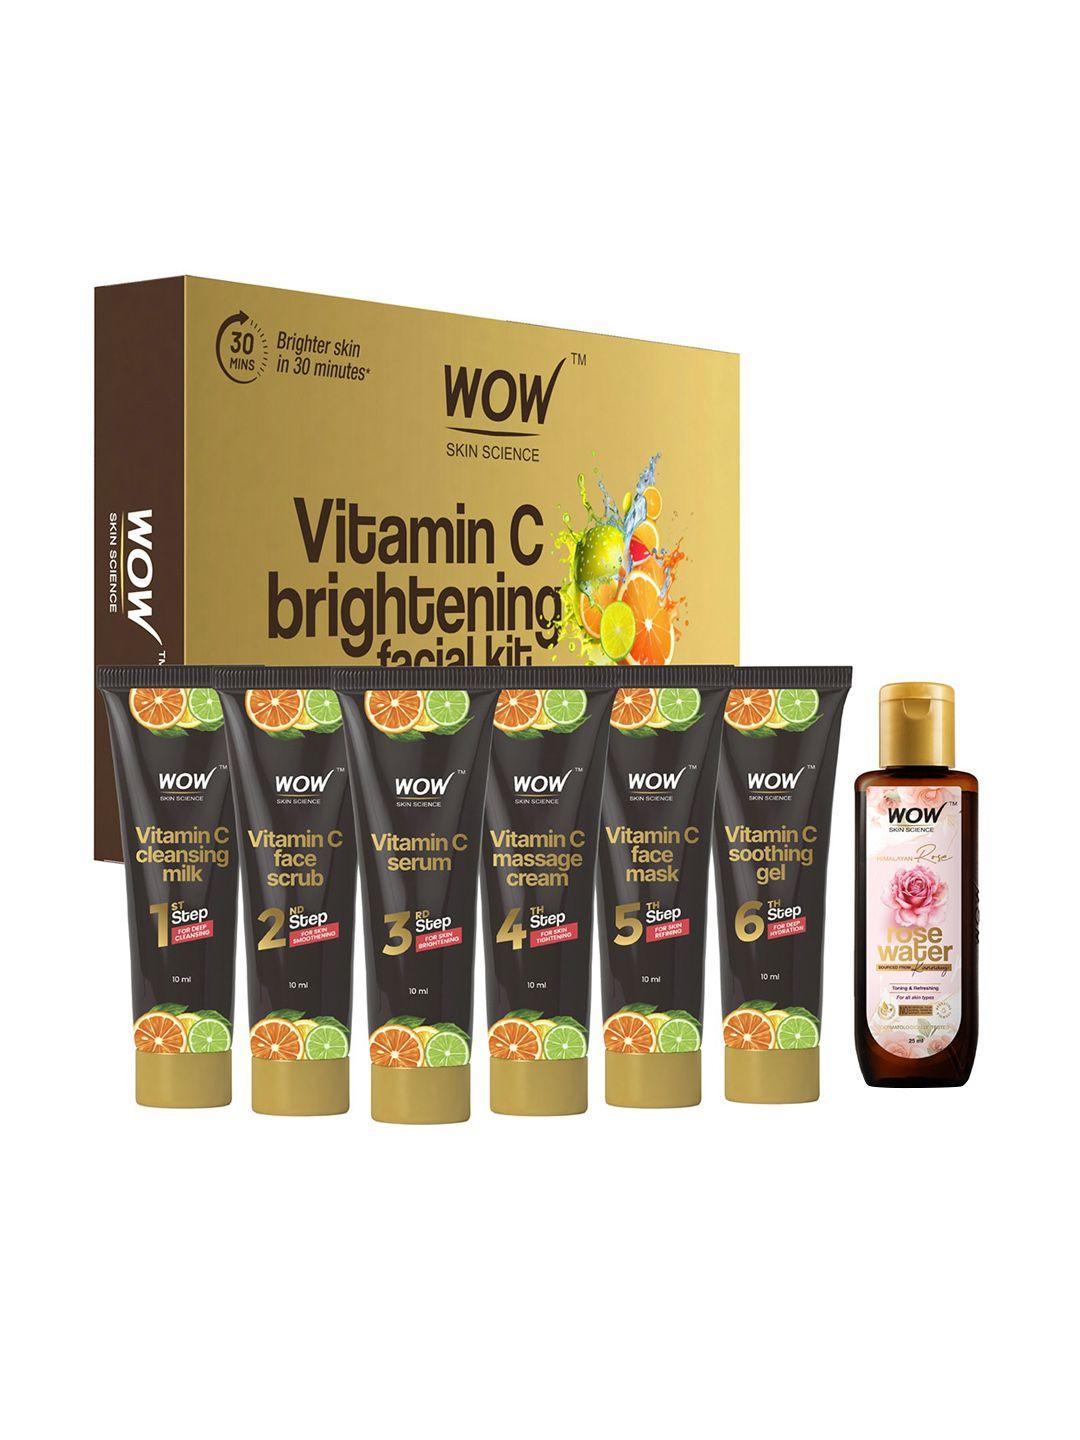 wow-skin-science-vitamin-c-brightening-facial-kit-with-free-rose-water